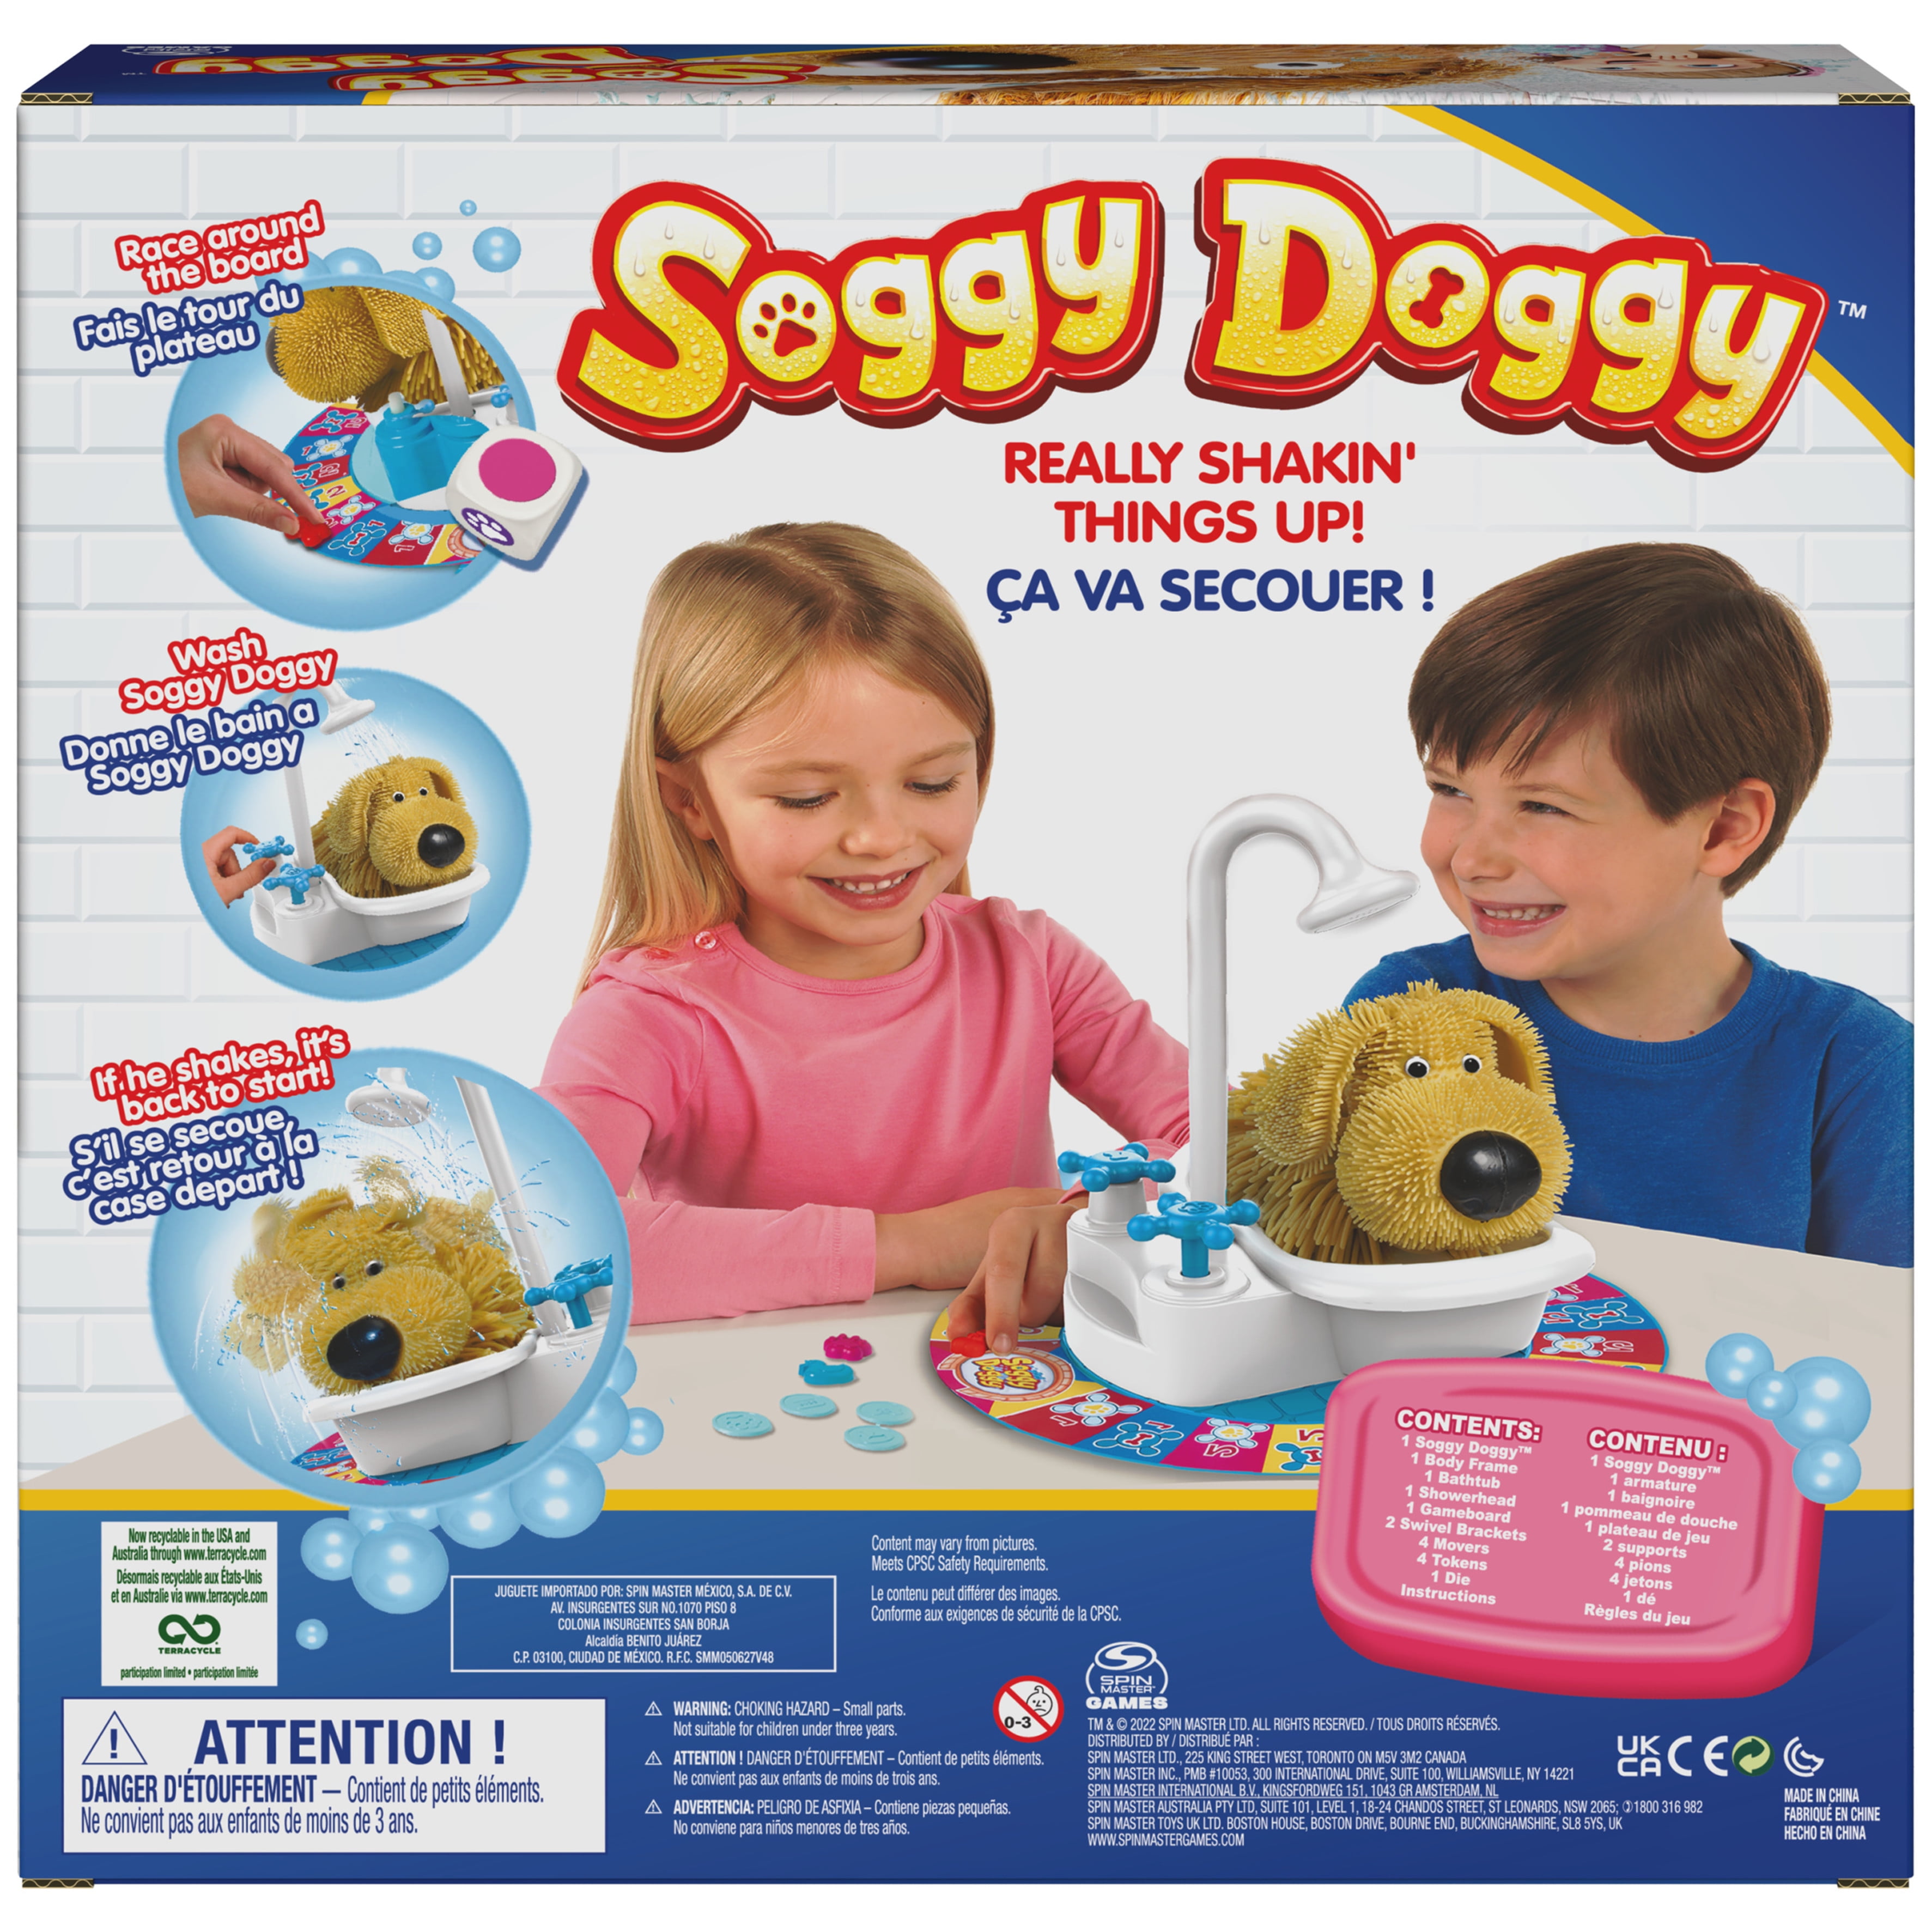  Soggy Doggy, The Showering Shaking Wet Dog Award-Winning Board  Game for Family Night Fun Games for Kids Toys & Games, for Kids Ages 4 and  up : Everything Else